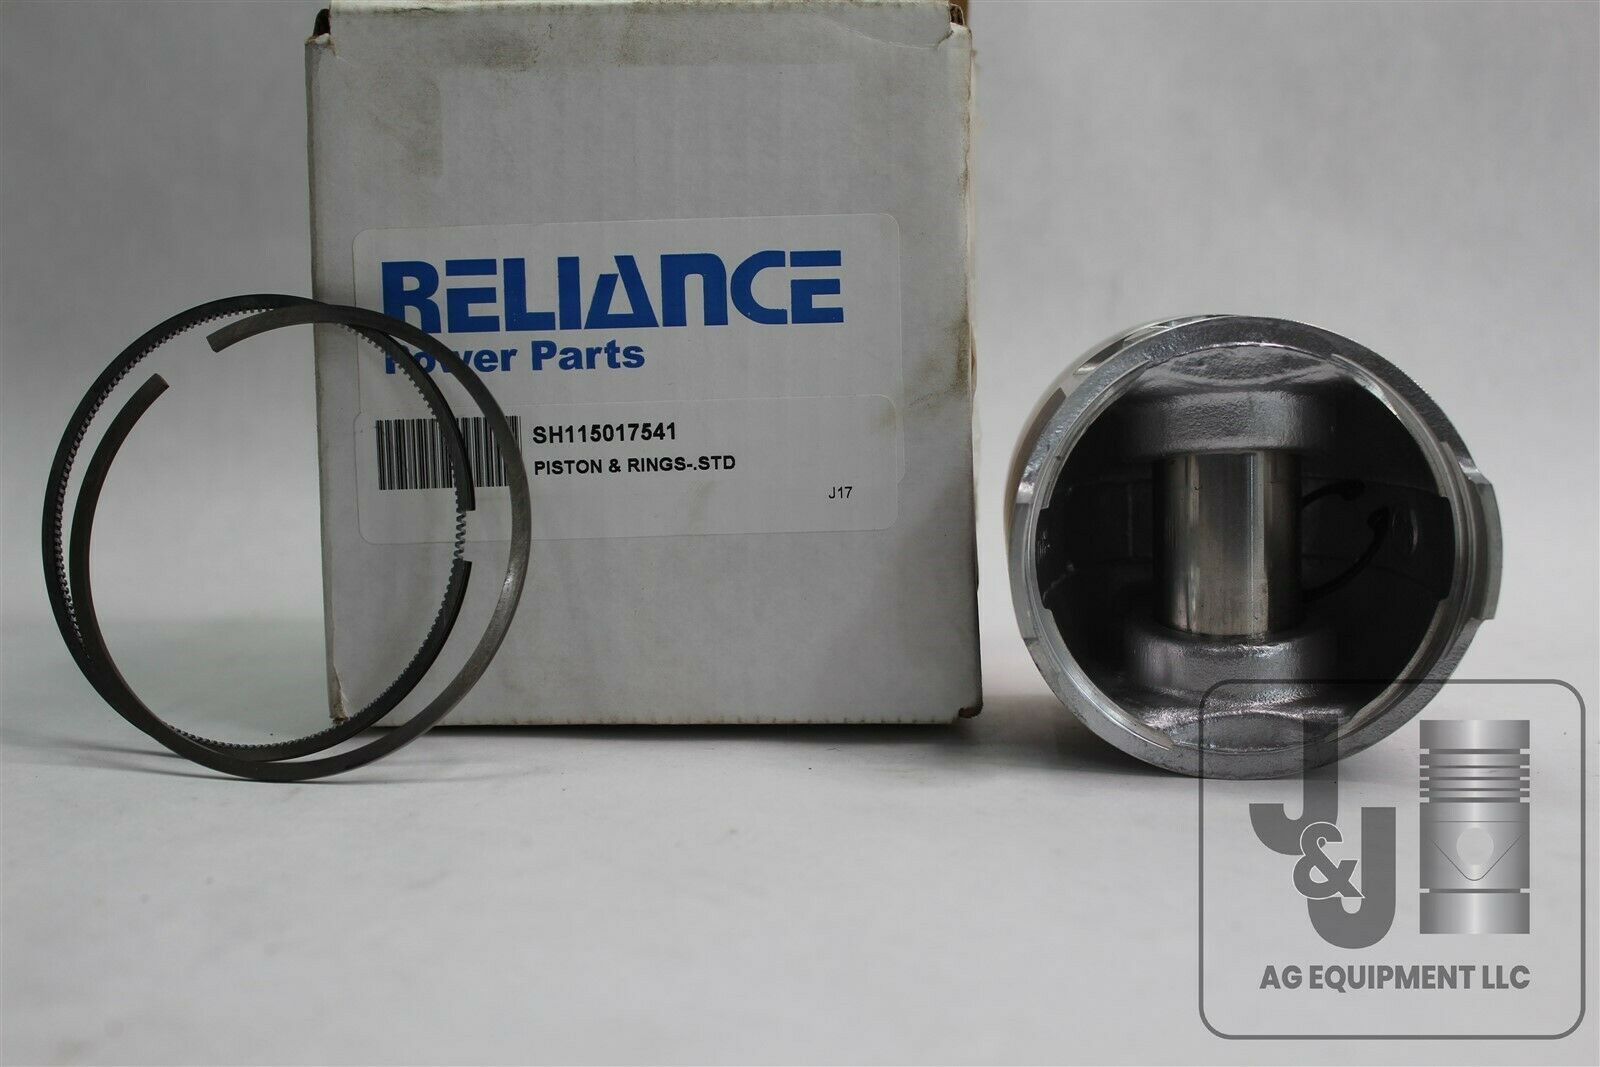 RELIANCE SH115017541 PISTON AND RINGS STD FITS FORD CATERPILLAR SHIBAURA